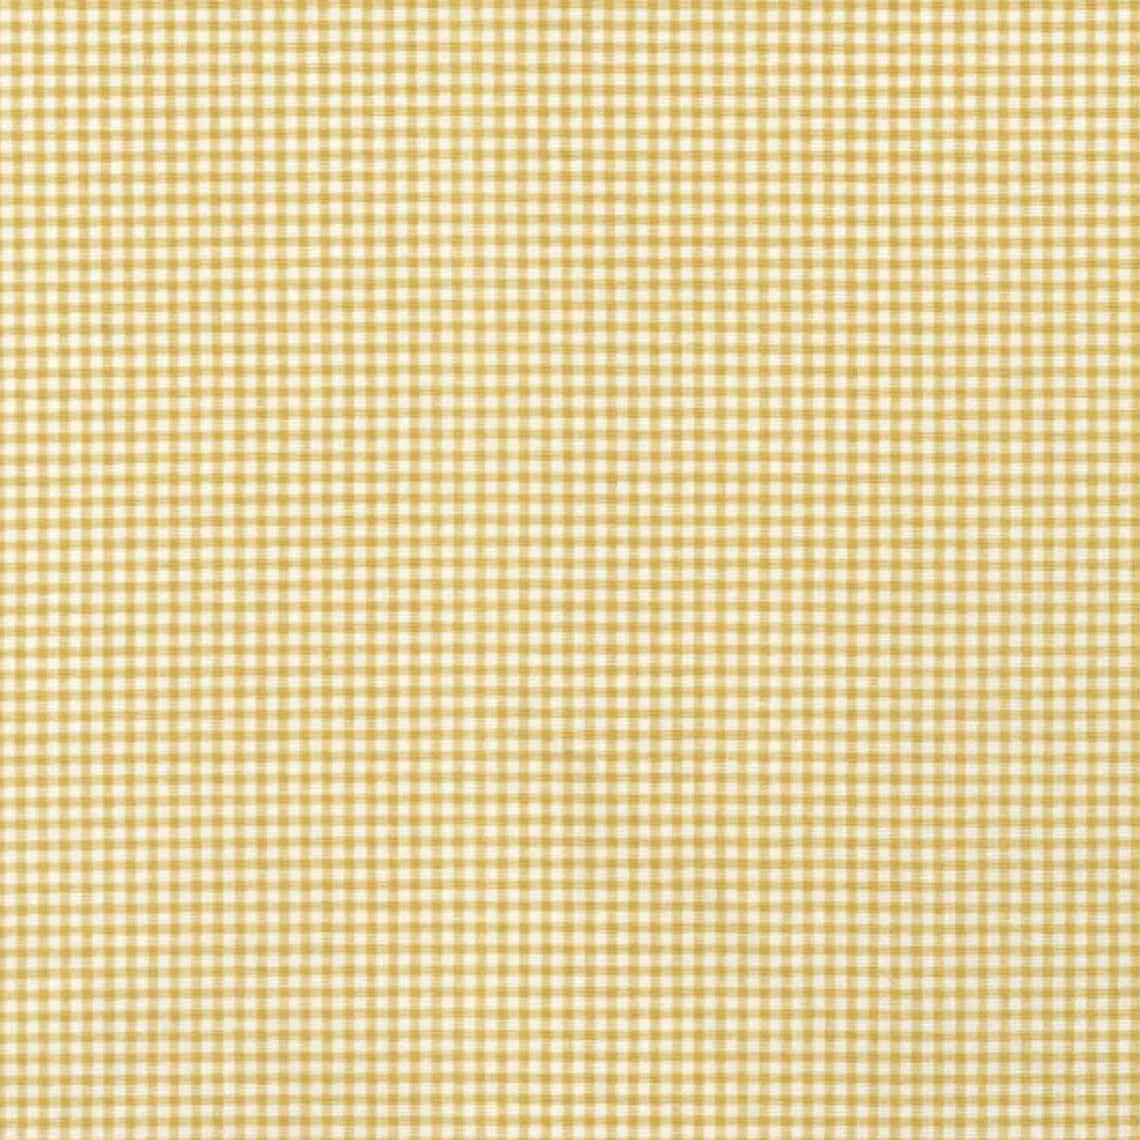 rod pocket curtain panels pair in farmhouse barley yellow gold gingham check